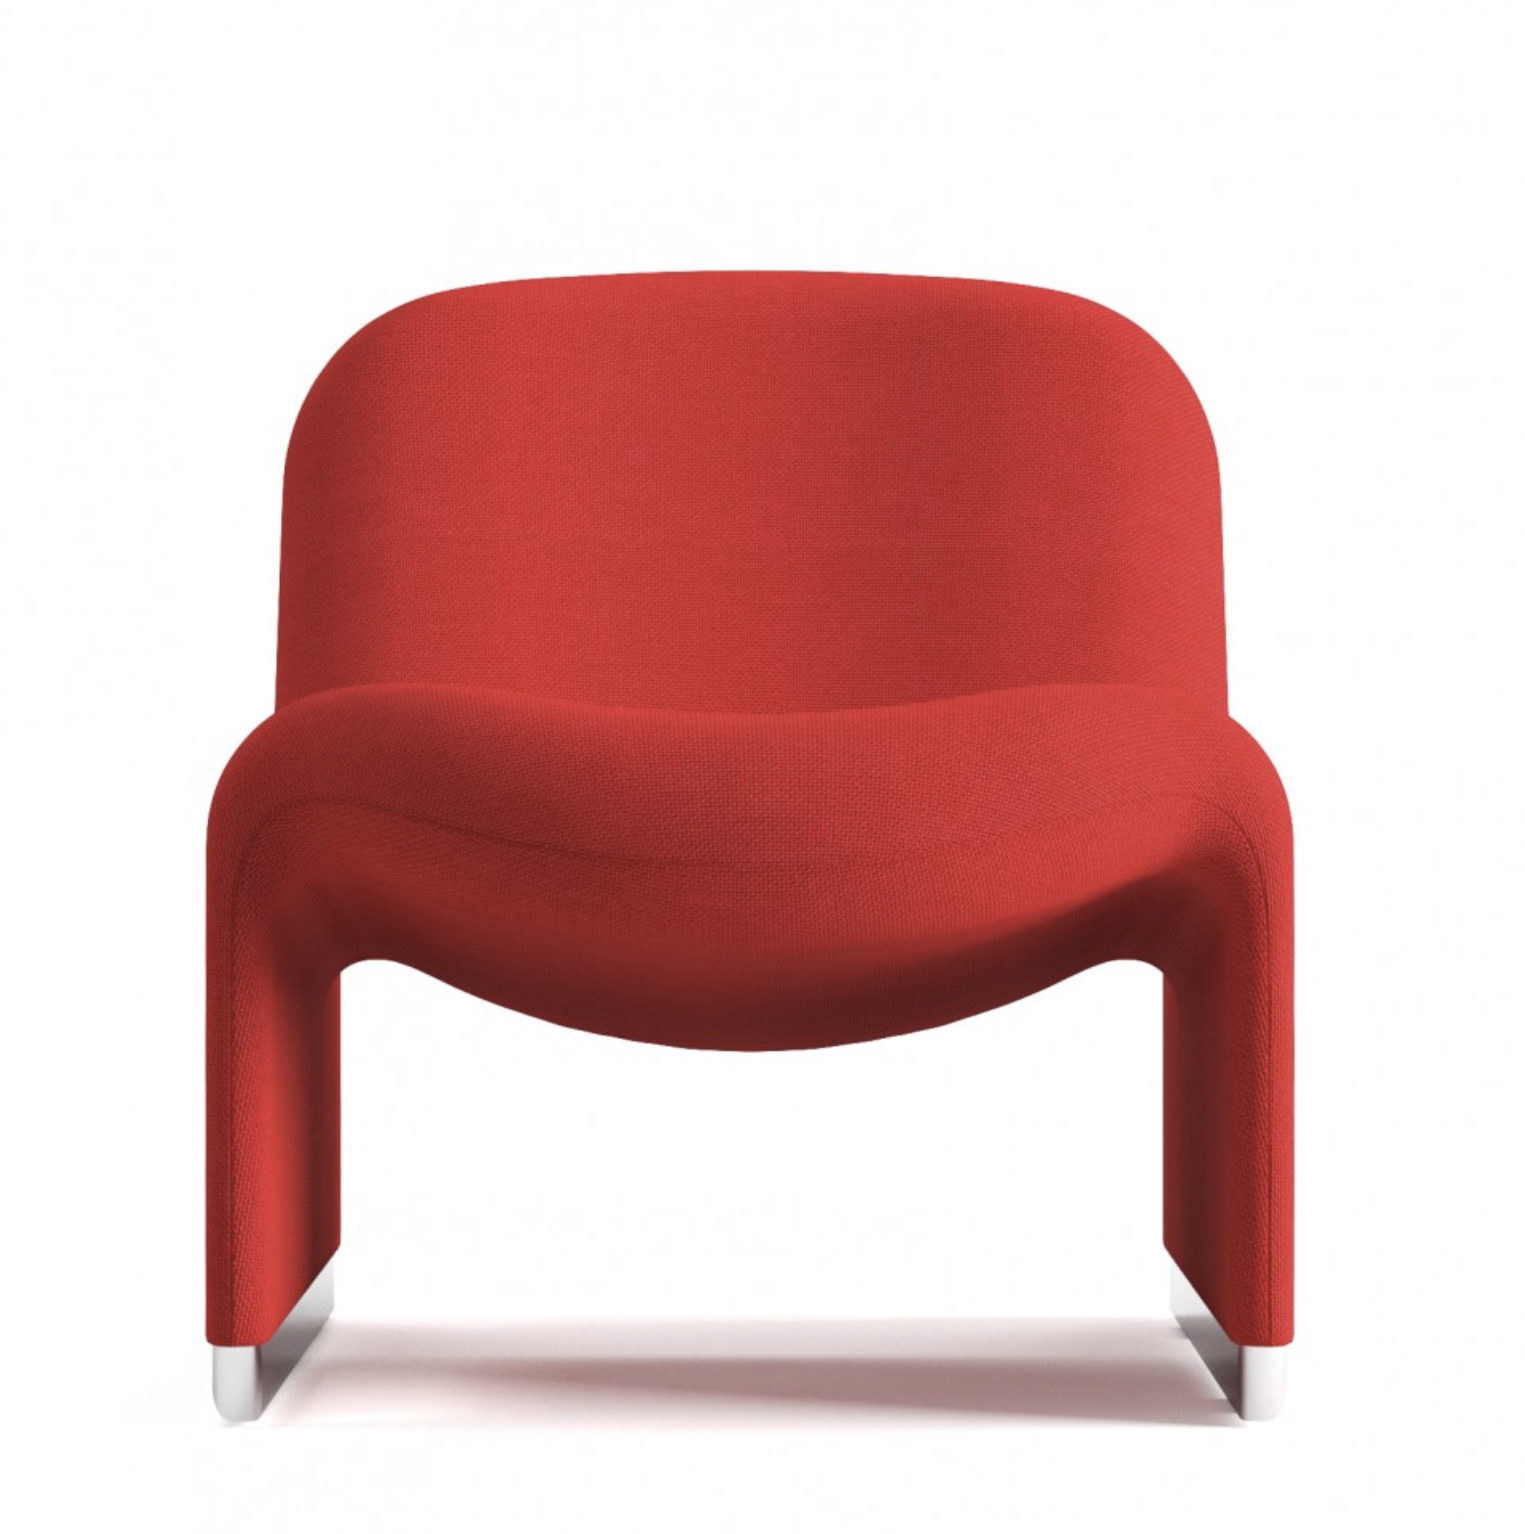 Armchair ALKY 21 by Castelli